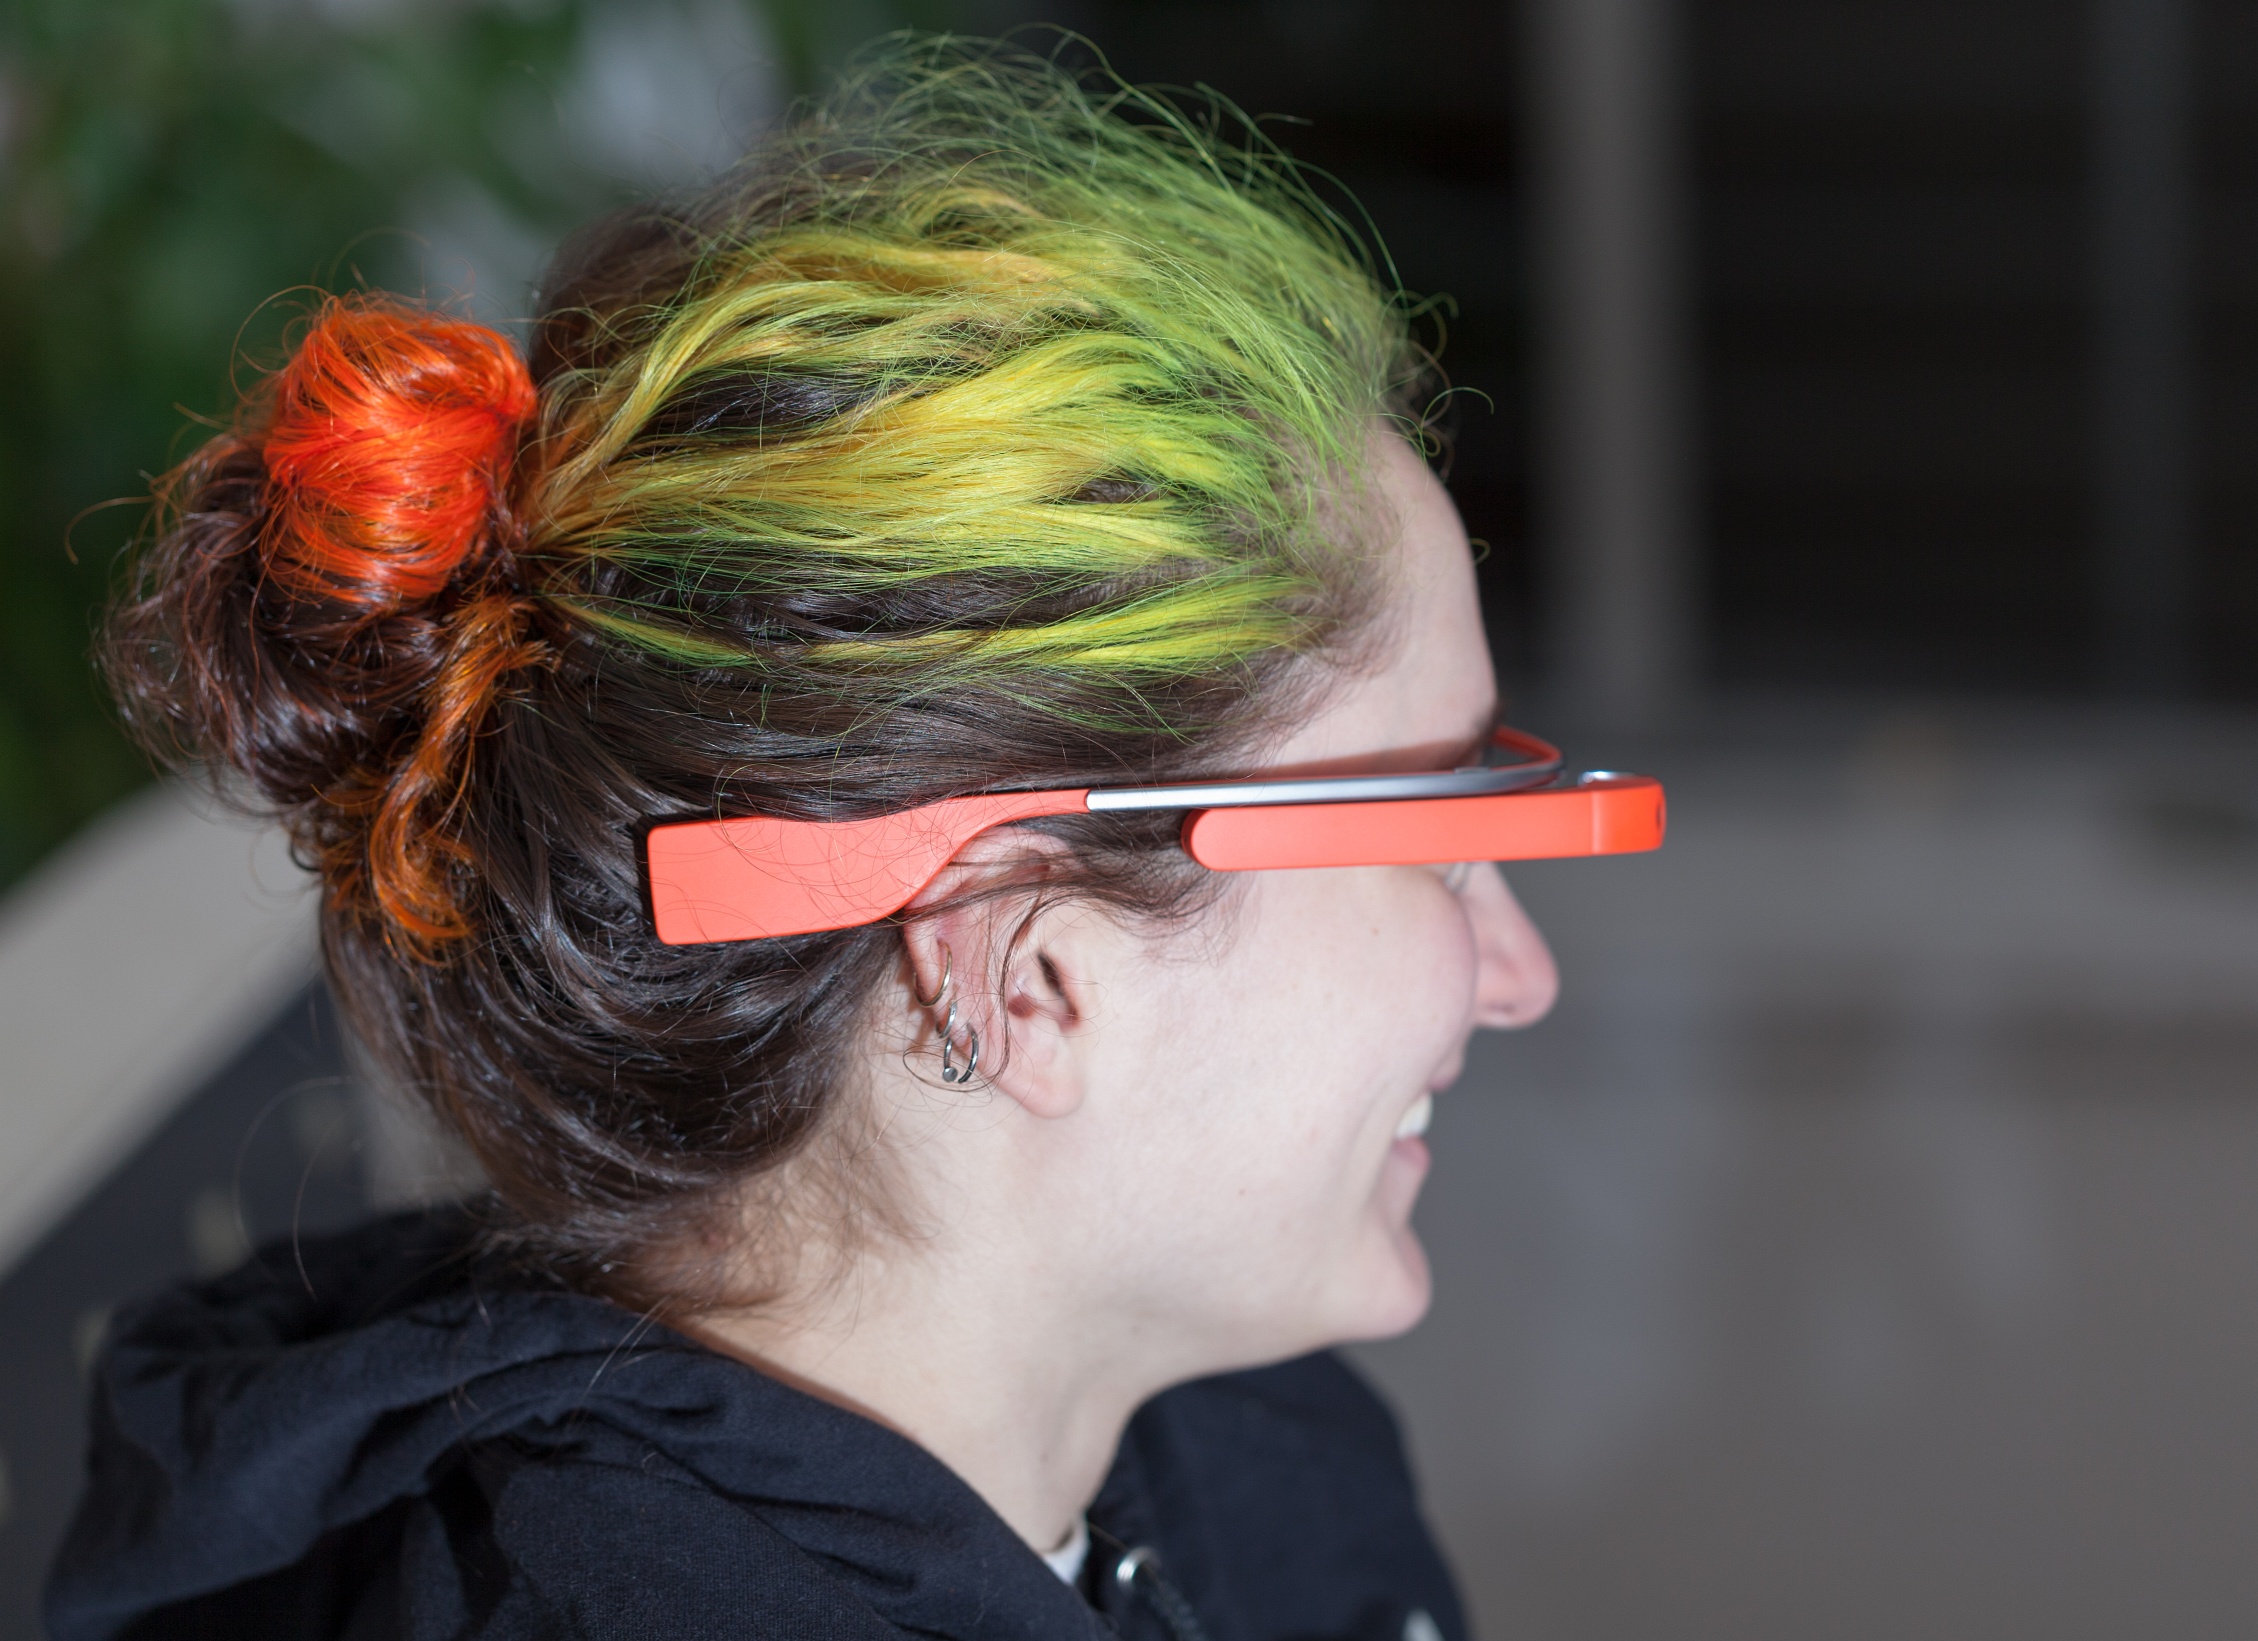 A side view on Google Glass.